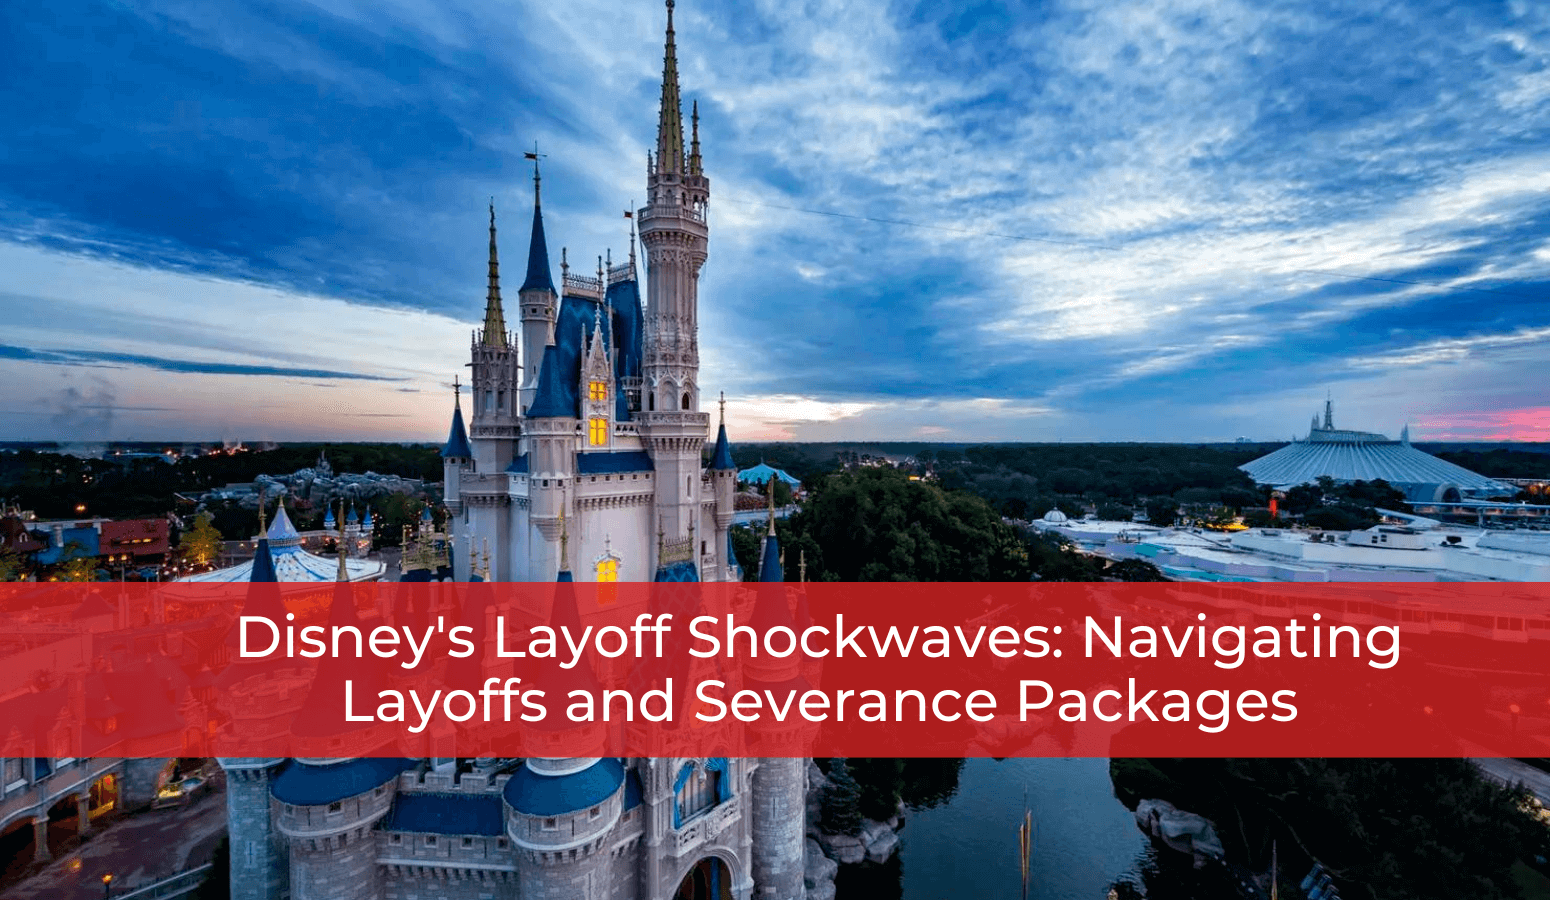 Featured image for “Disney’s Layoff Shockwaves: Navigating Layoffs and Severance Packages”